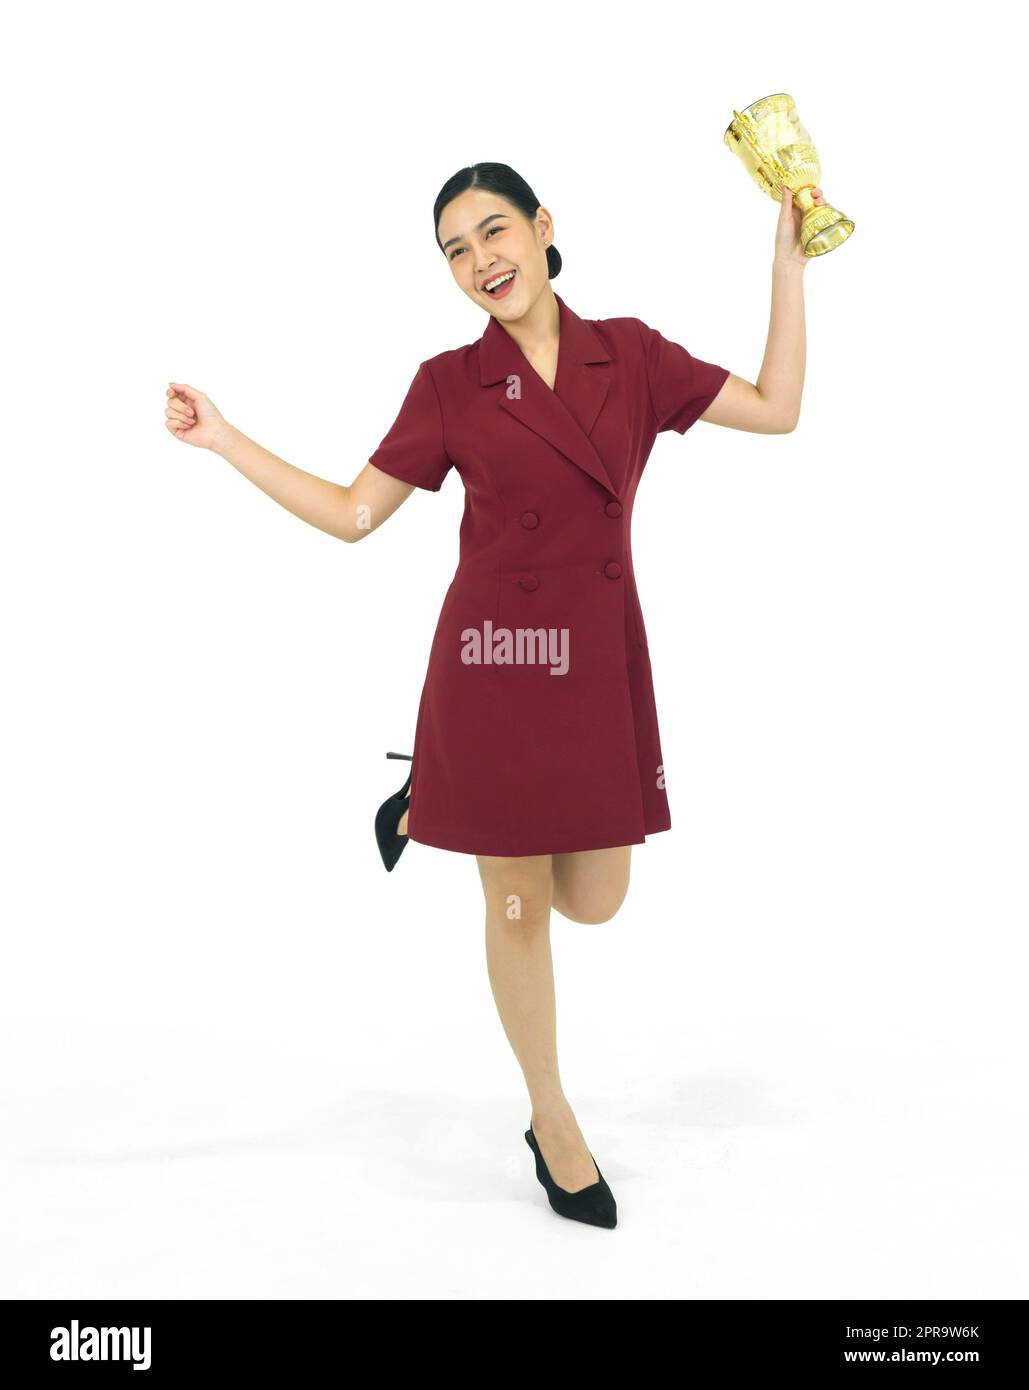 Asian businesswoman in red dress holding the golden trophy while stand in one leg. Portrait on white background with studio light. Stock Photo